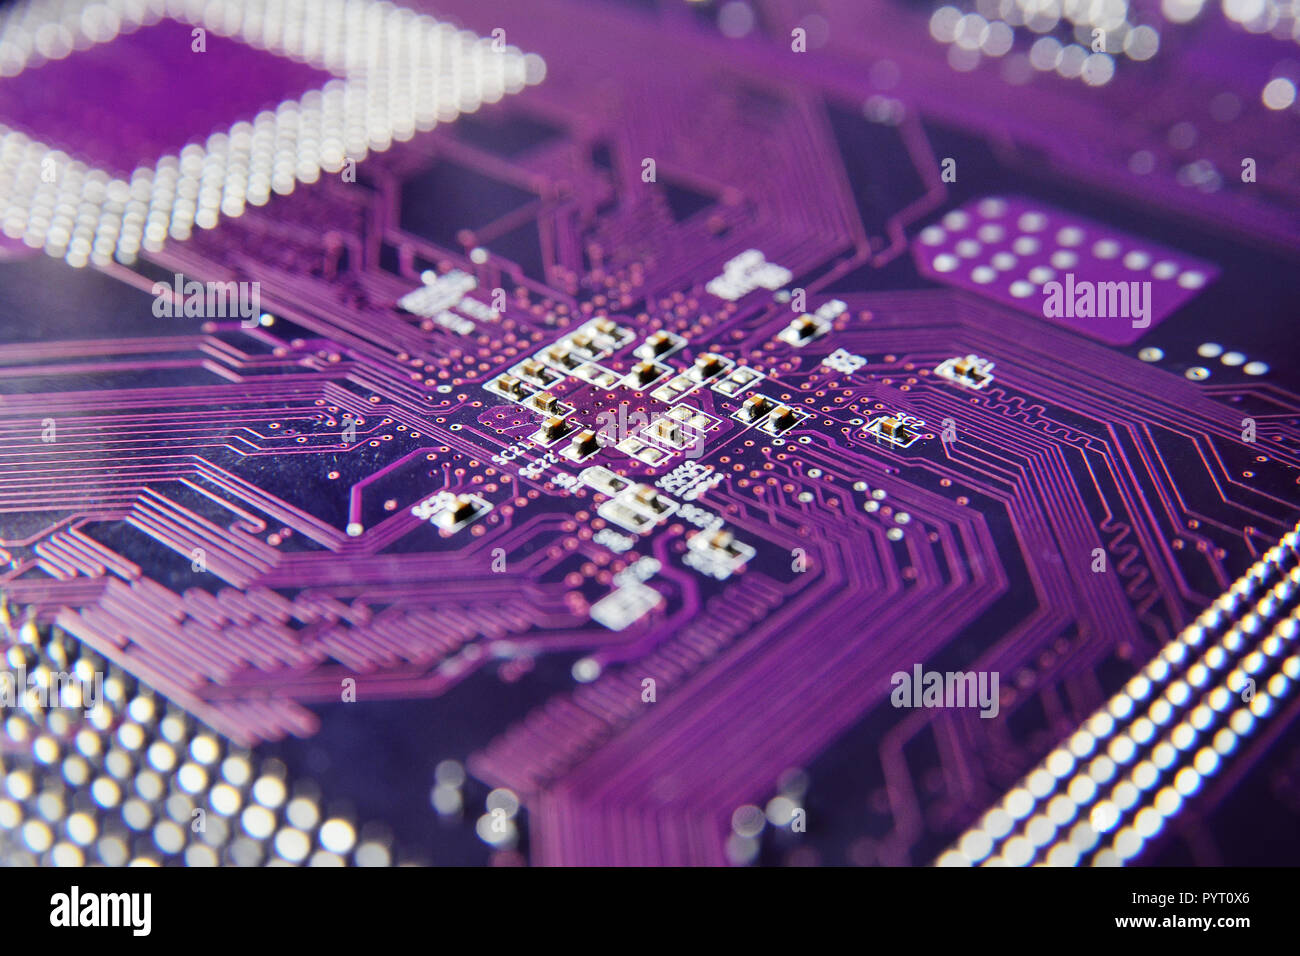 lilac chip or computer board close up Stock Photo